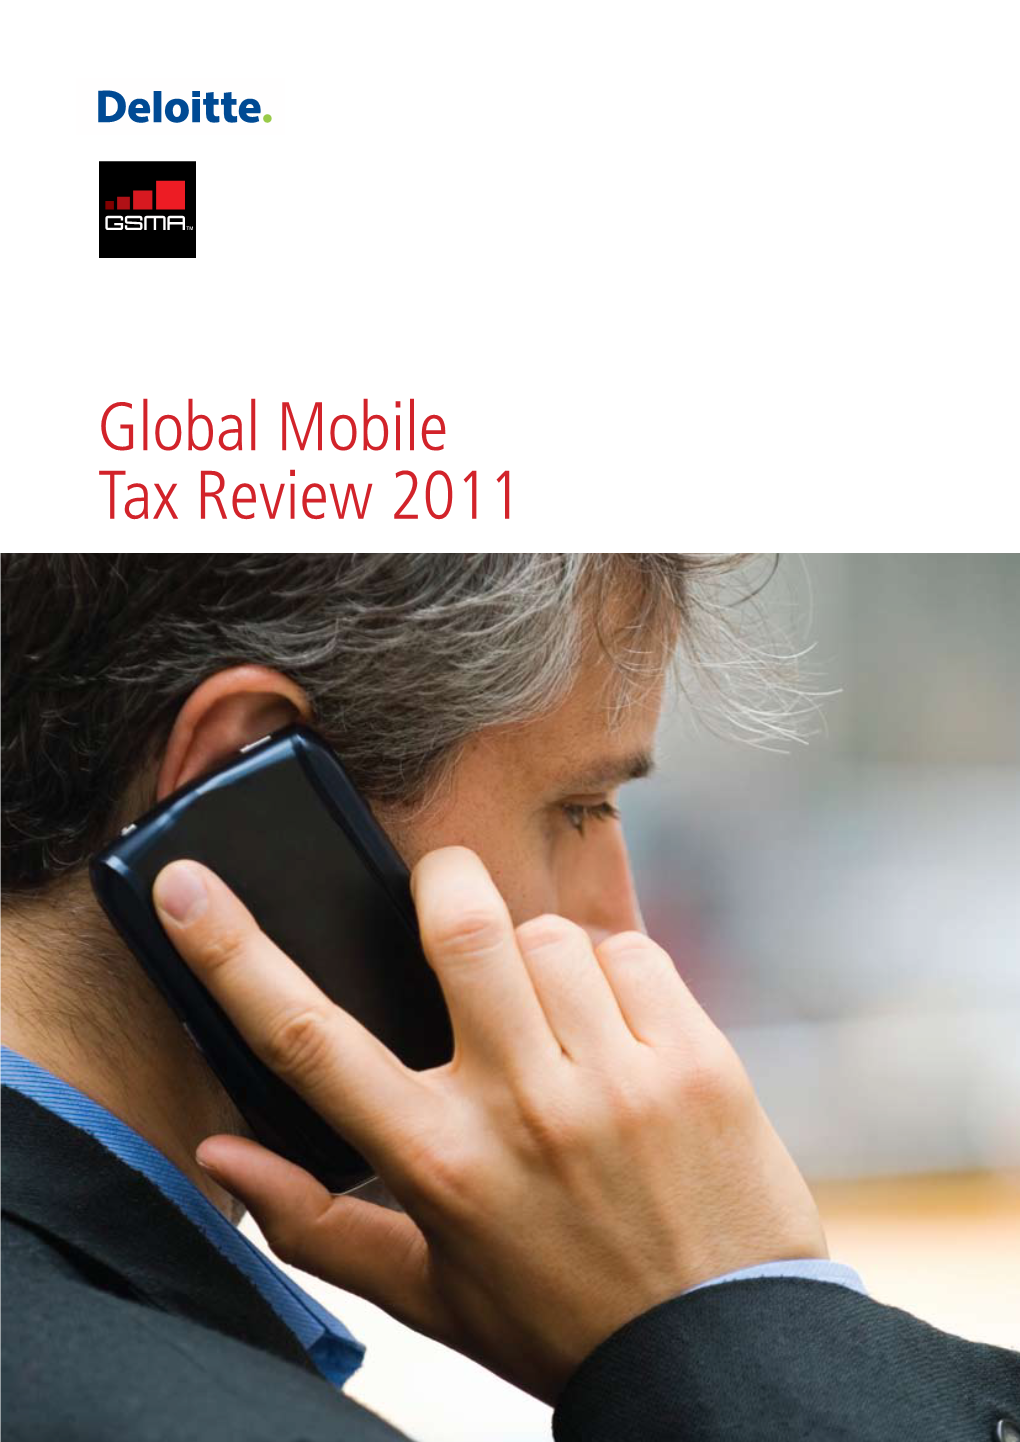 Global Mobile Tax Review 2011